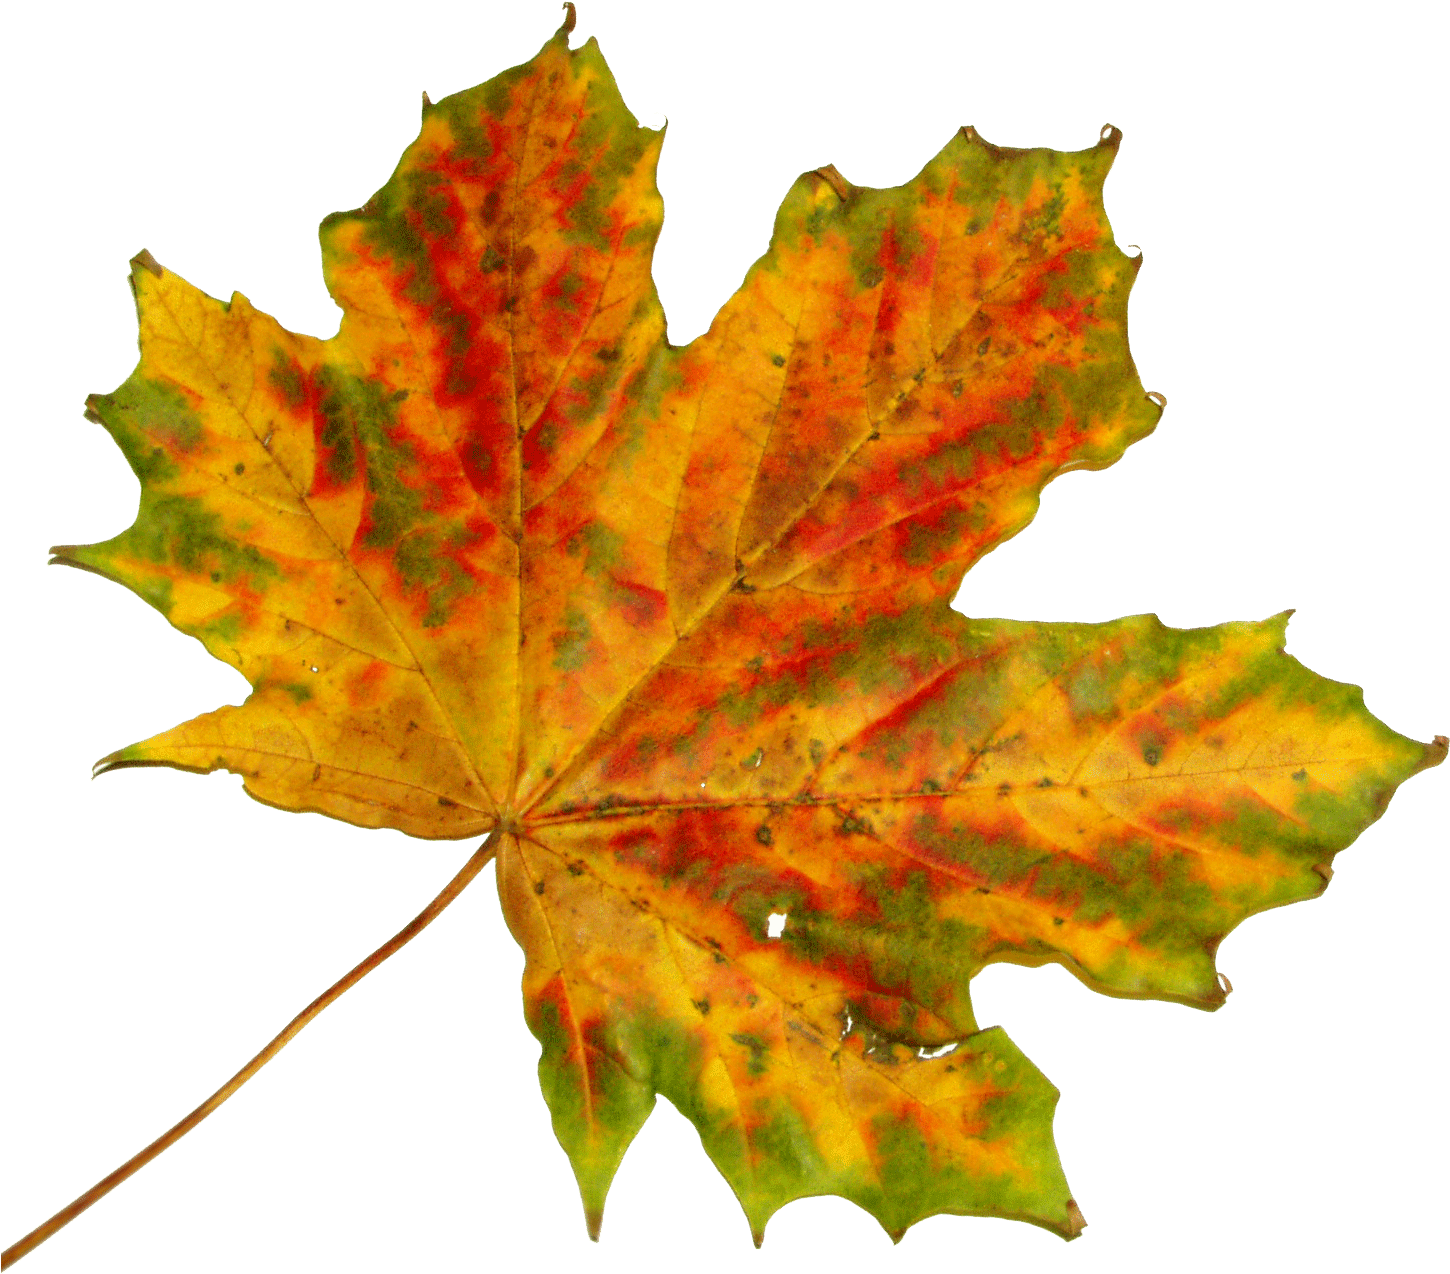 Free Vector Graphic - Fall Leaves To Cut Out - (1458x1273) Png Clipart ...